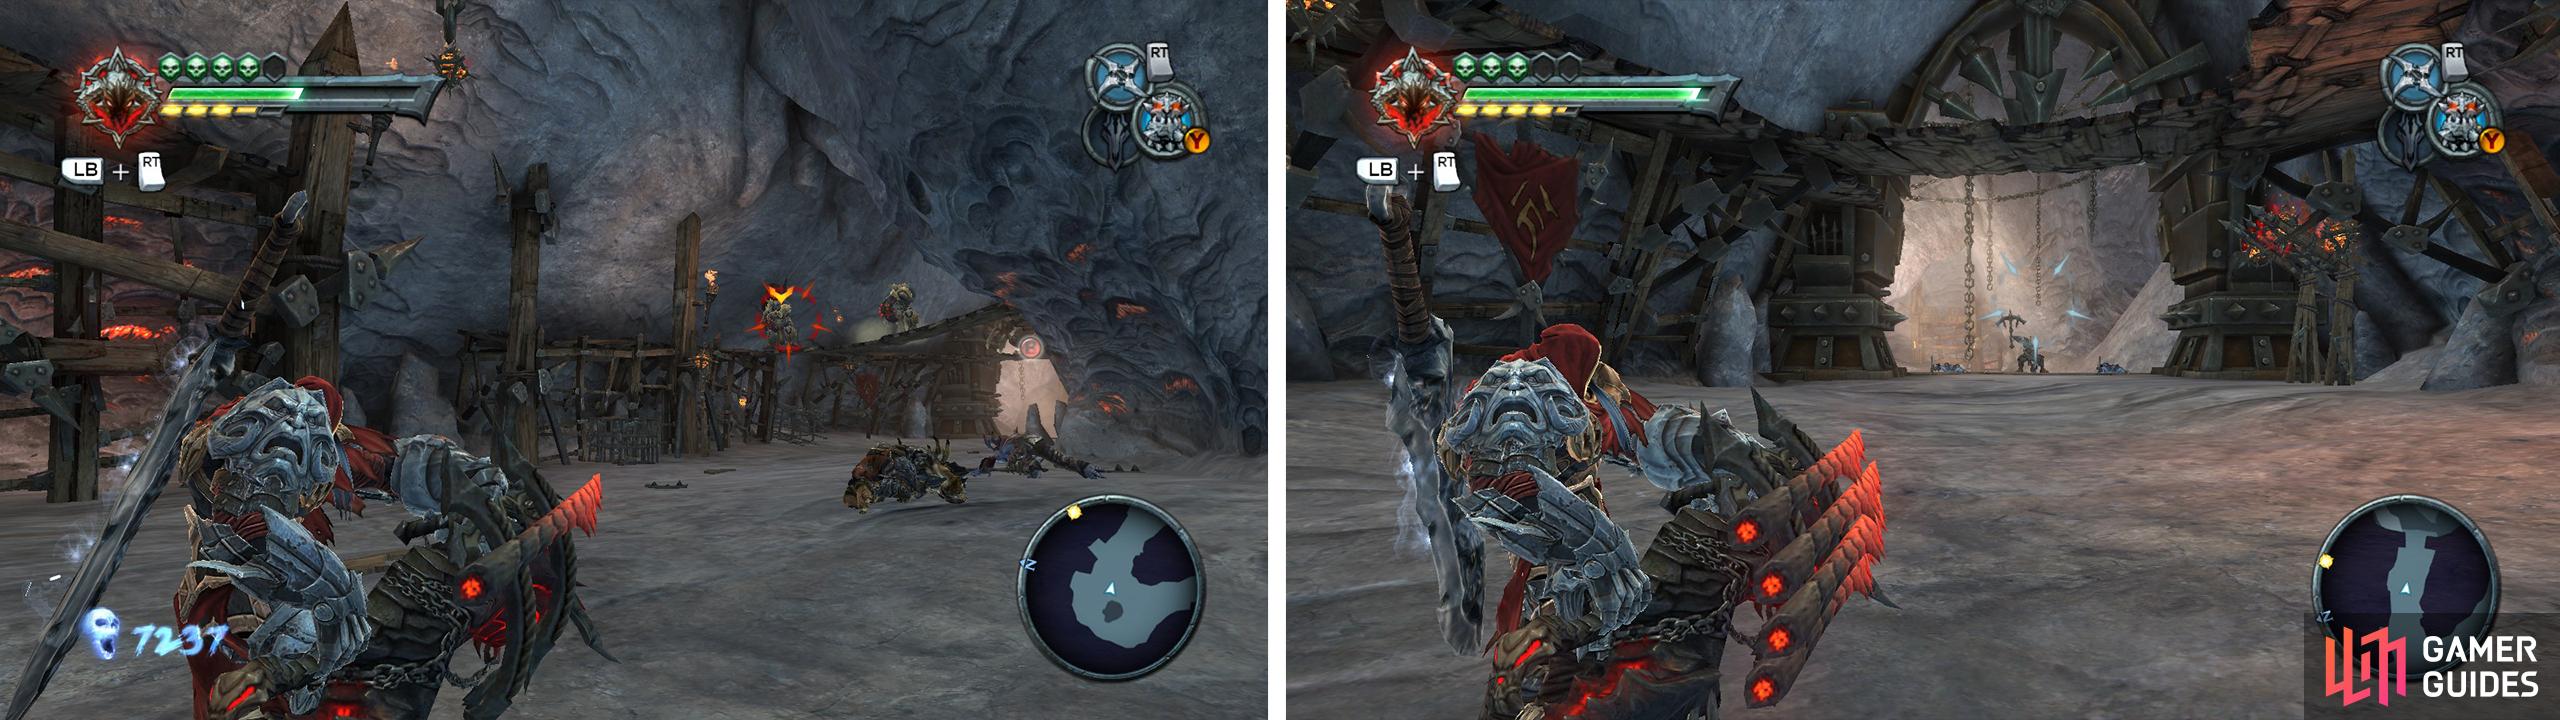 Use the Fractue Cannon to fight through the enemies (left) until you reach the exit (right).